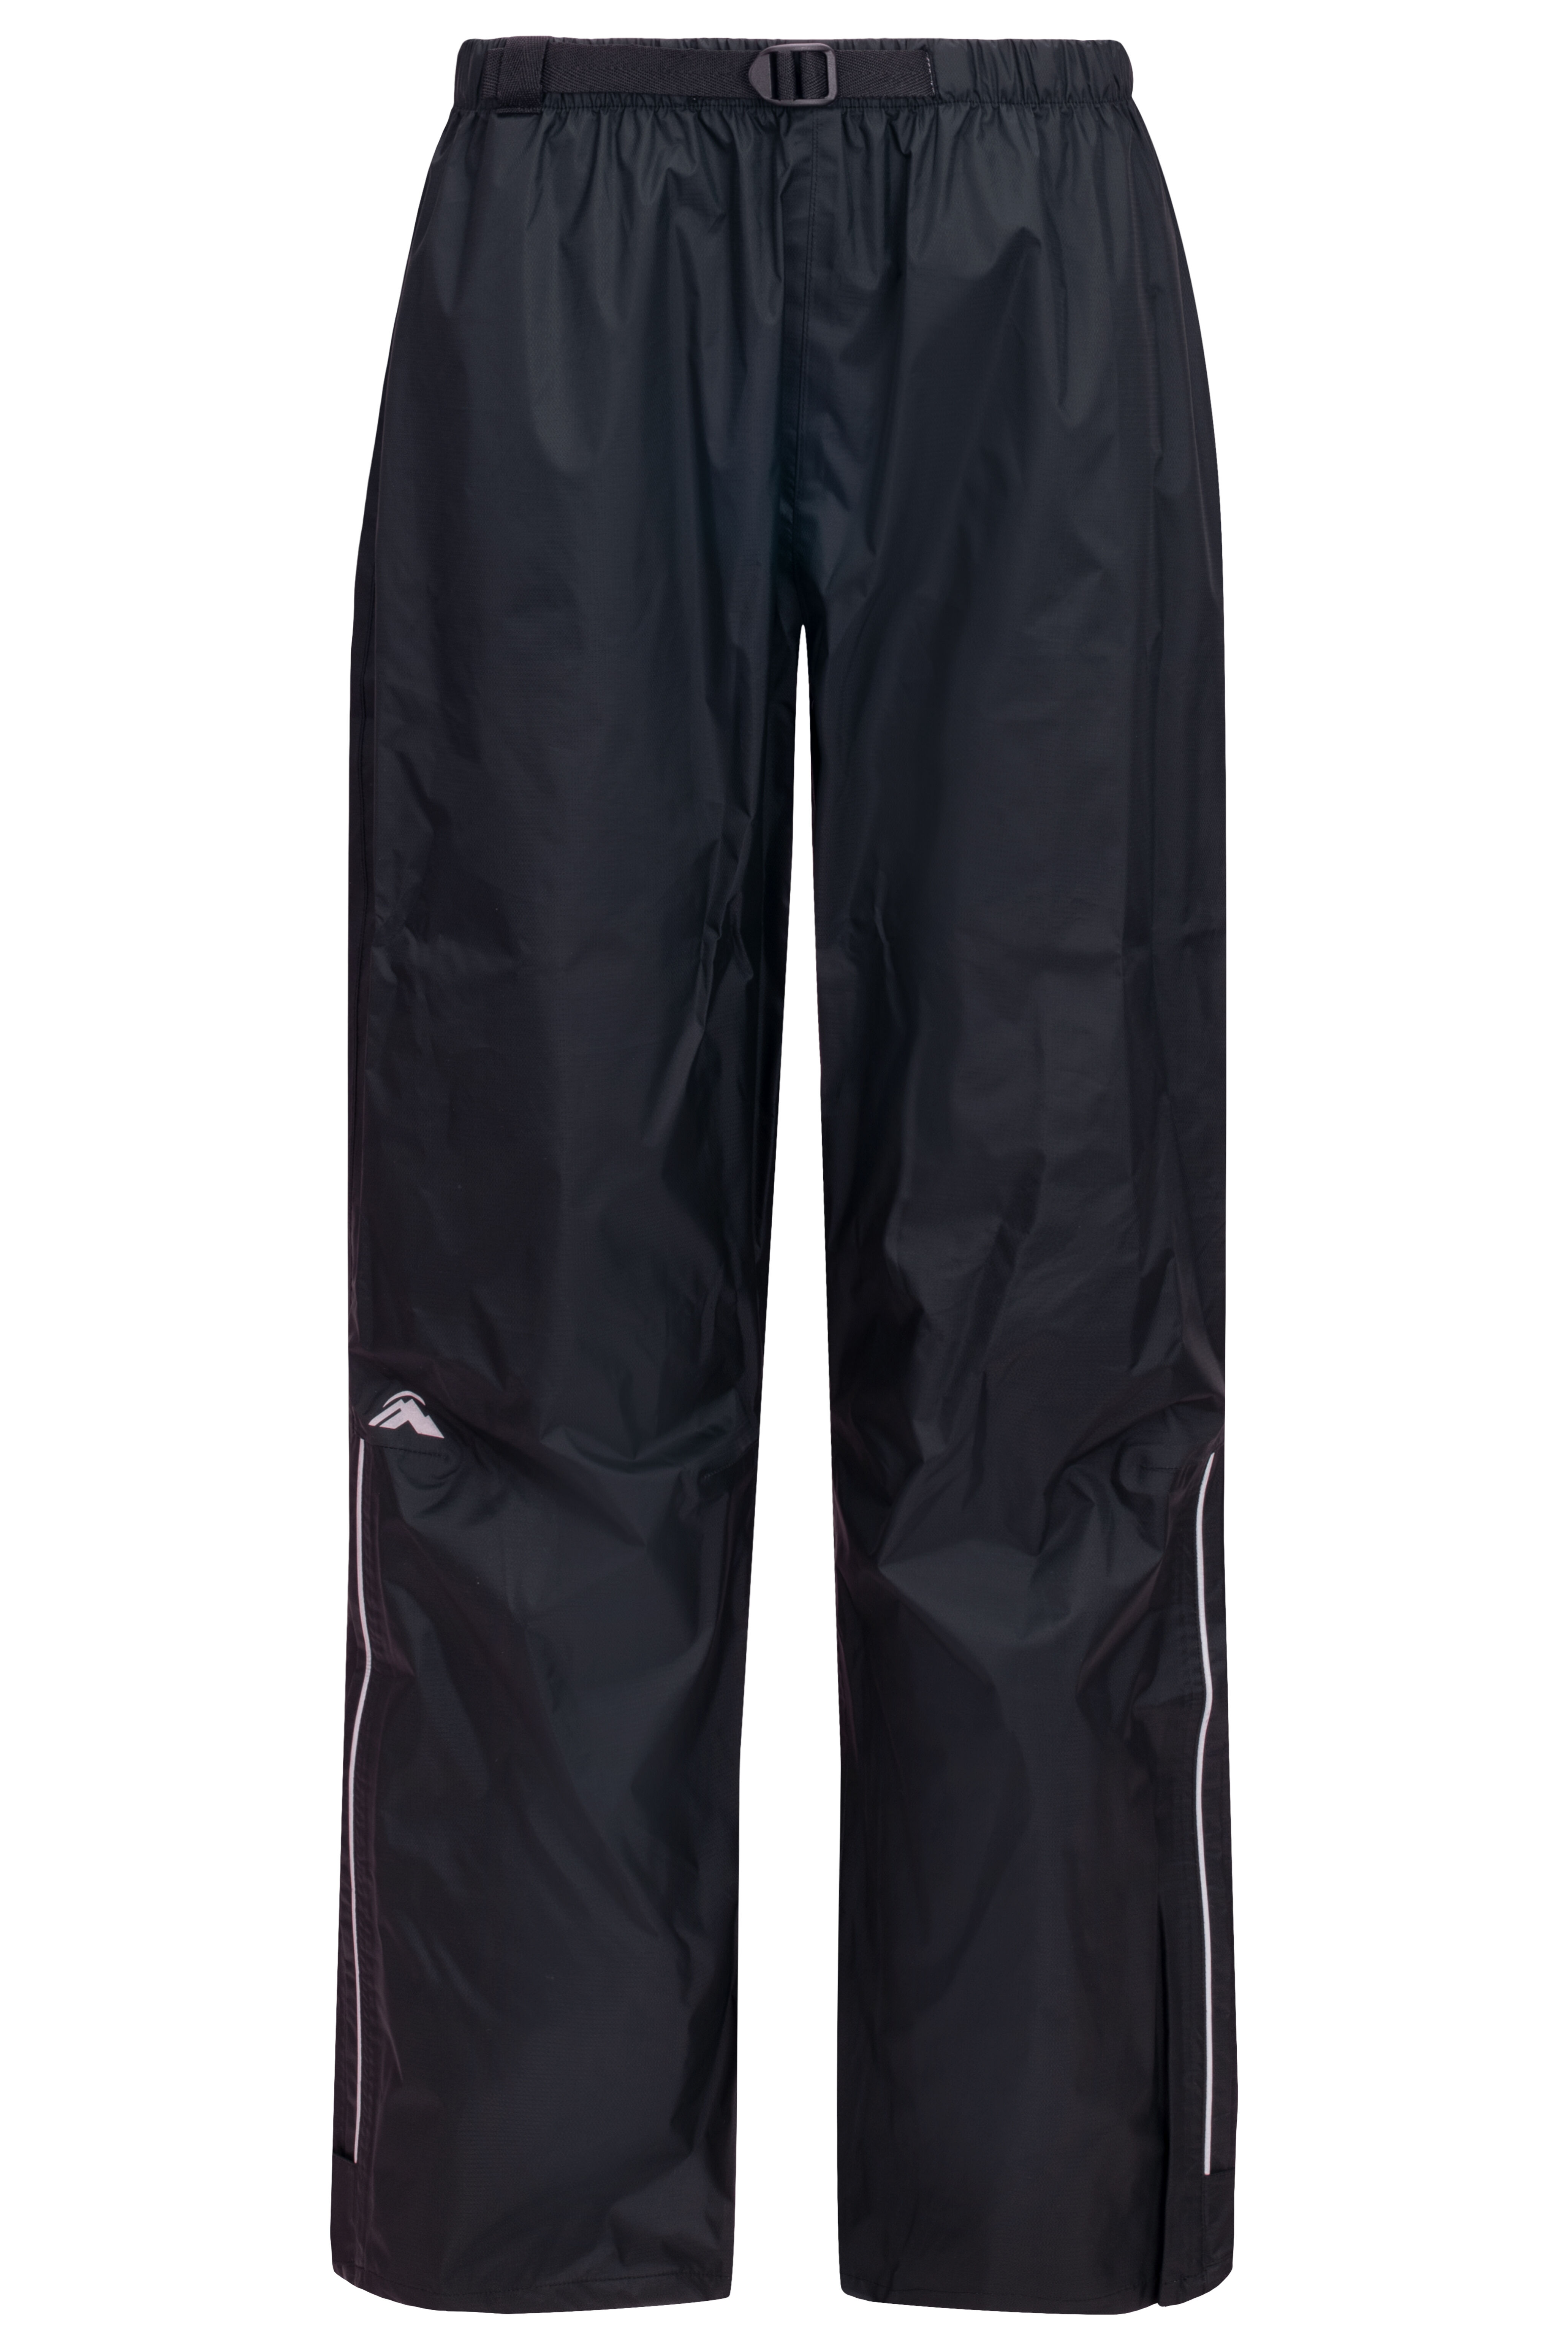 Outdoor Research Helium Rain Pants — Backcountry Emily